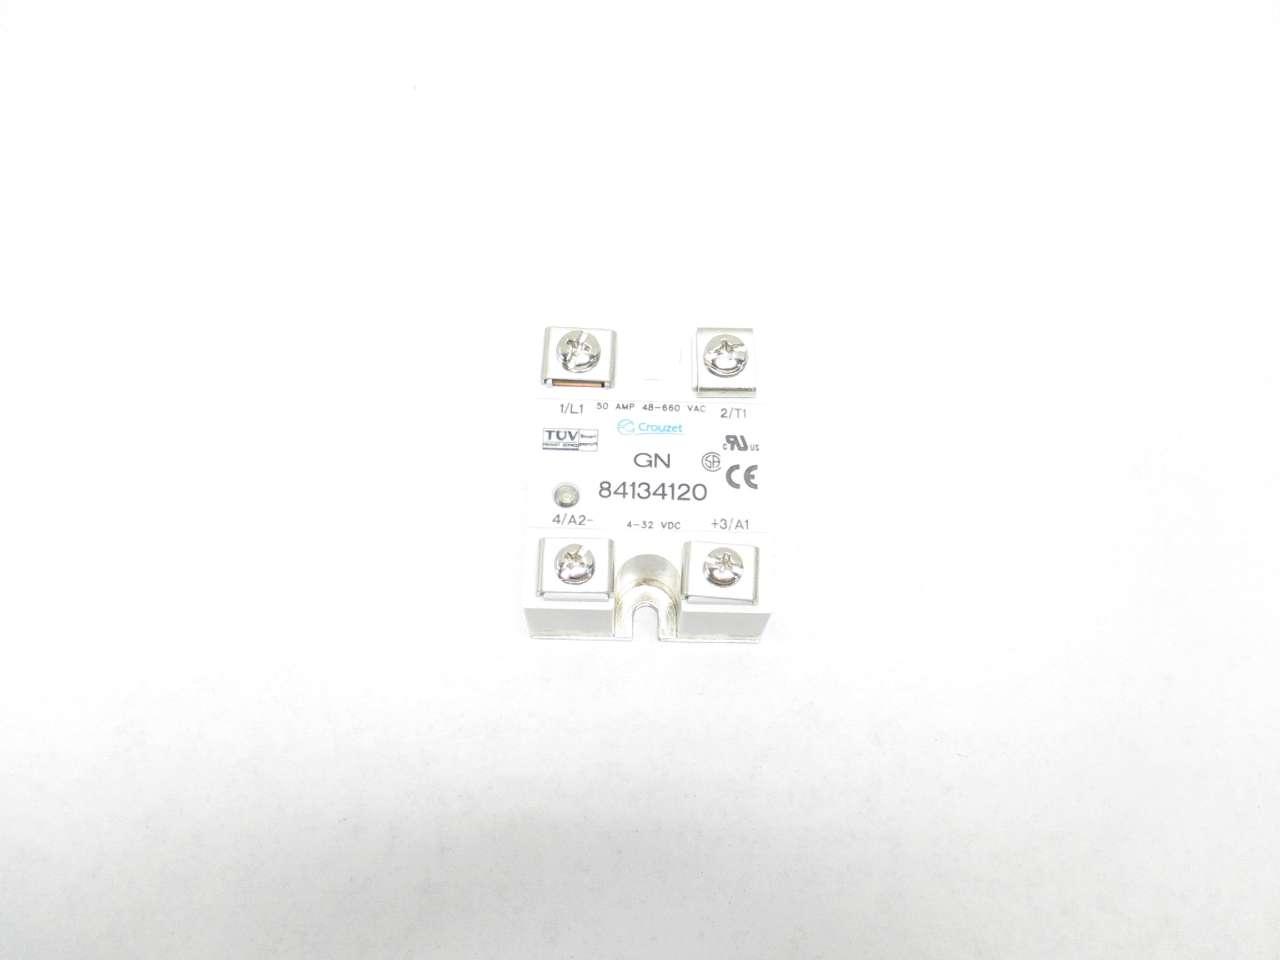 NEW IN BOX Crouzet RELAY WITH HEAT SINK 84134120 Ss Panel Mount 660V 32Vdc 50A 